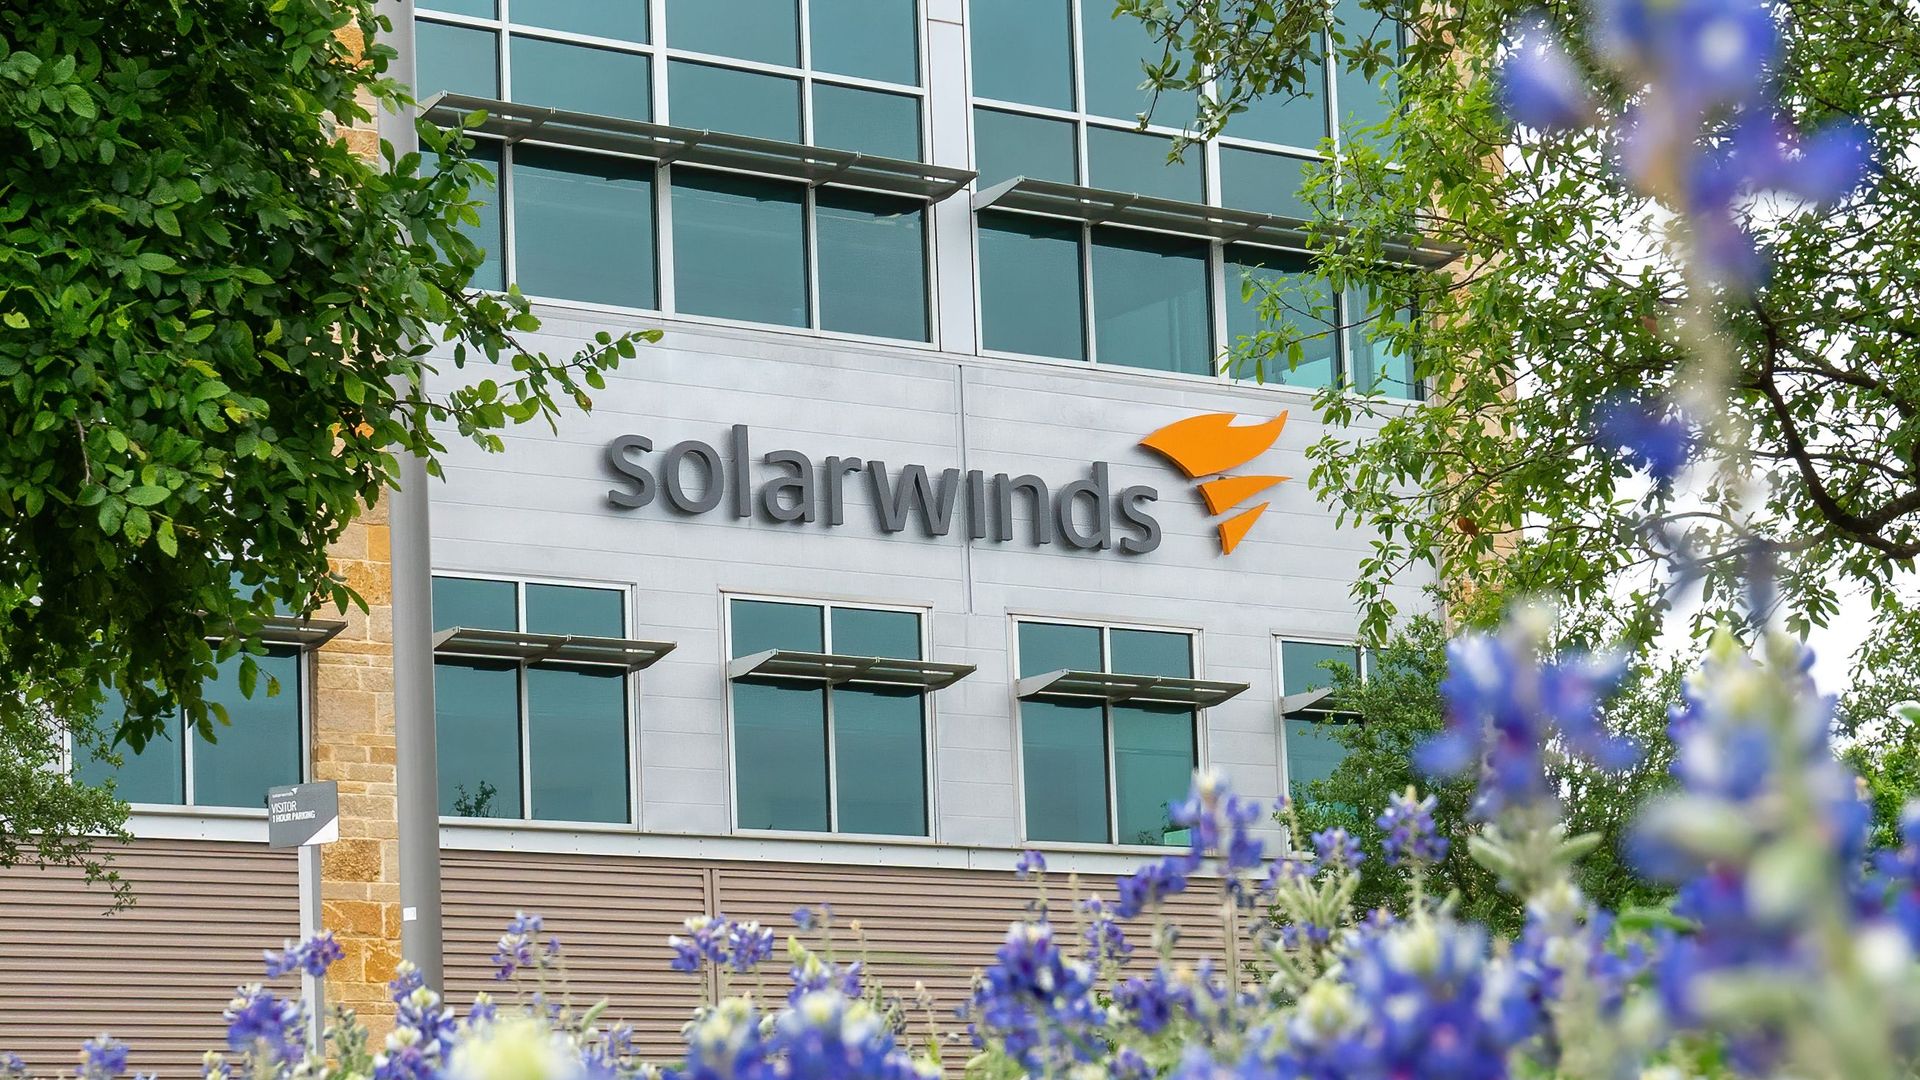 Image of the SolarWinds logo on the side of its headquarters building